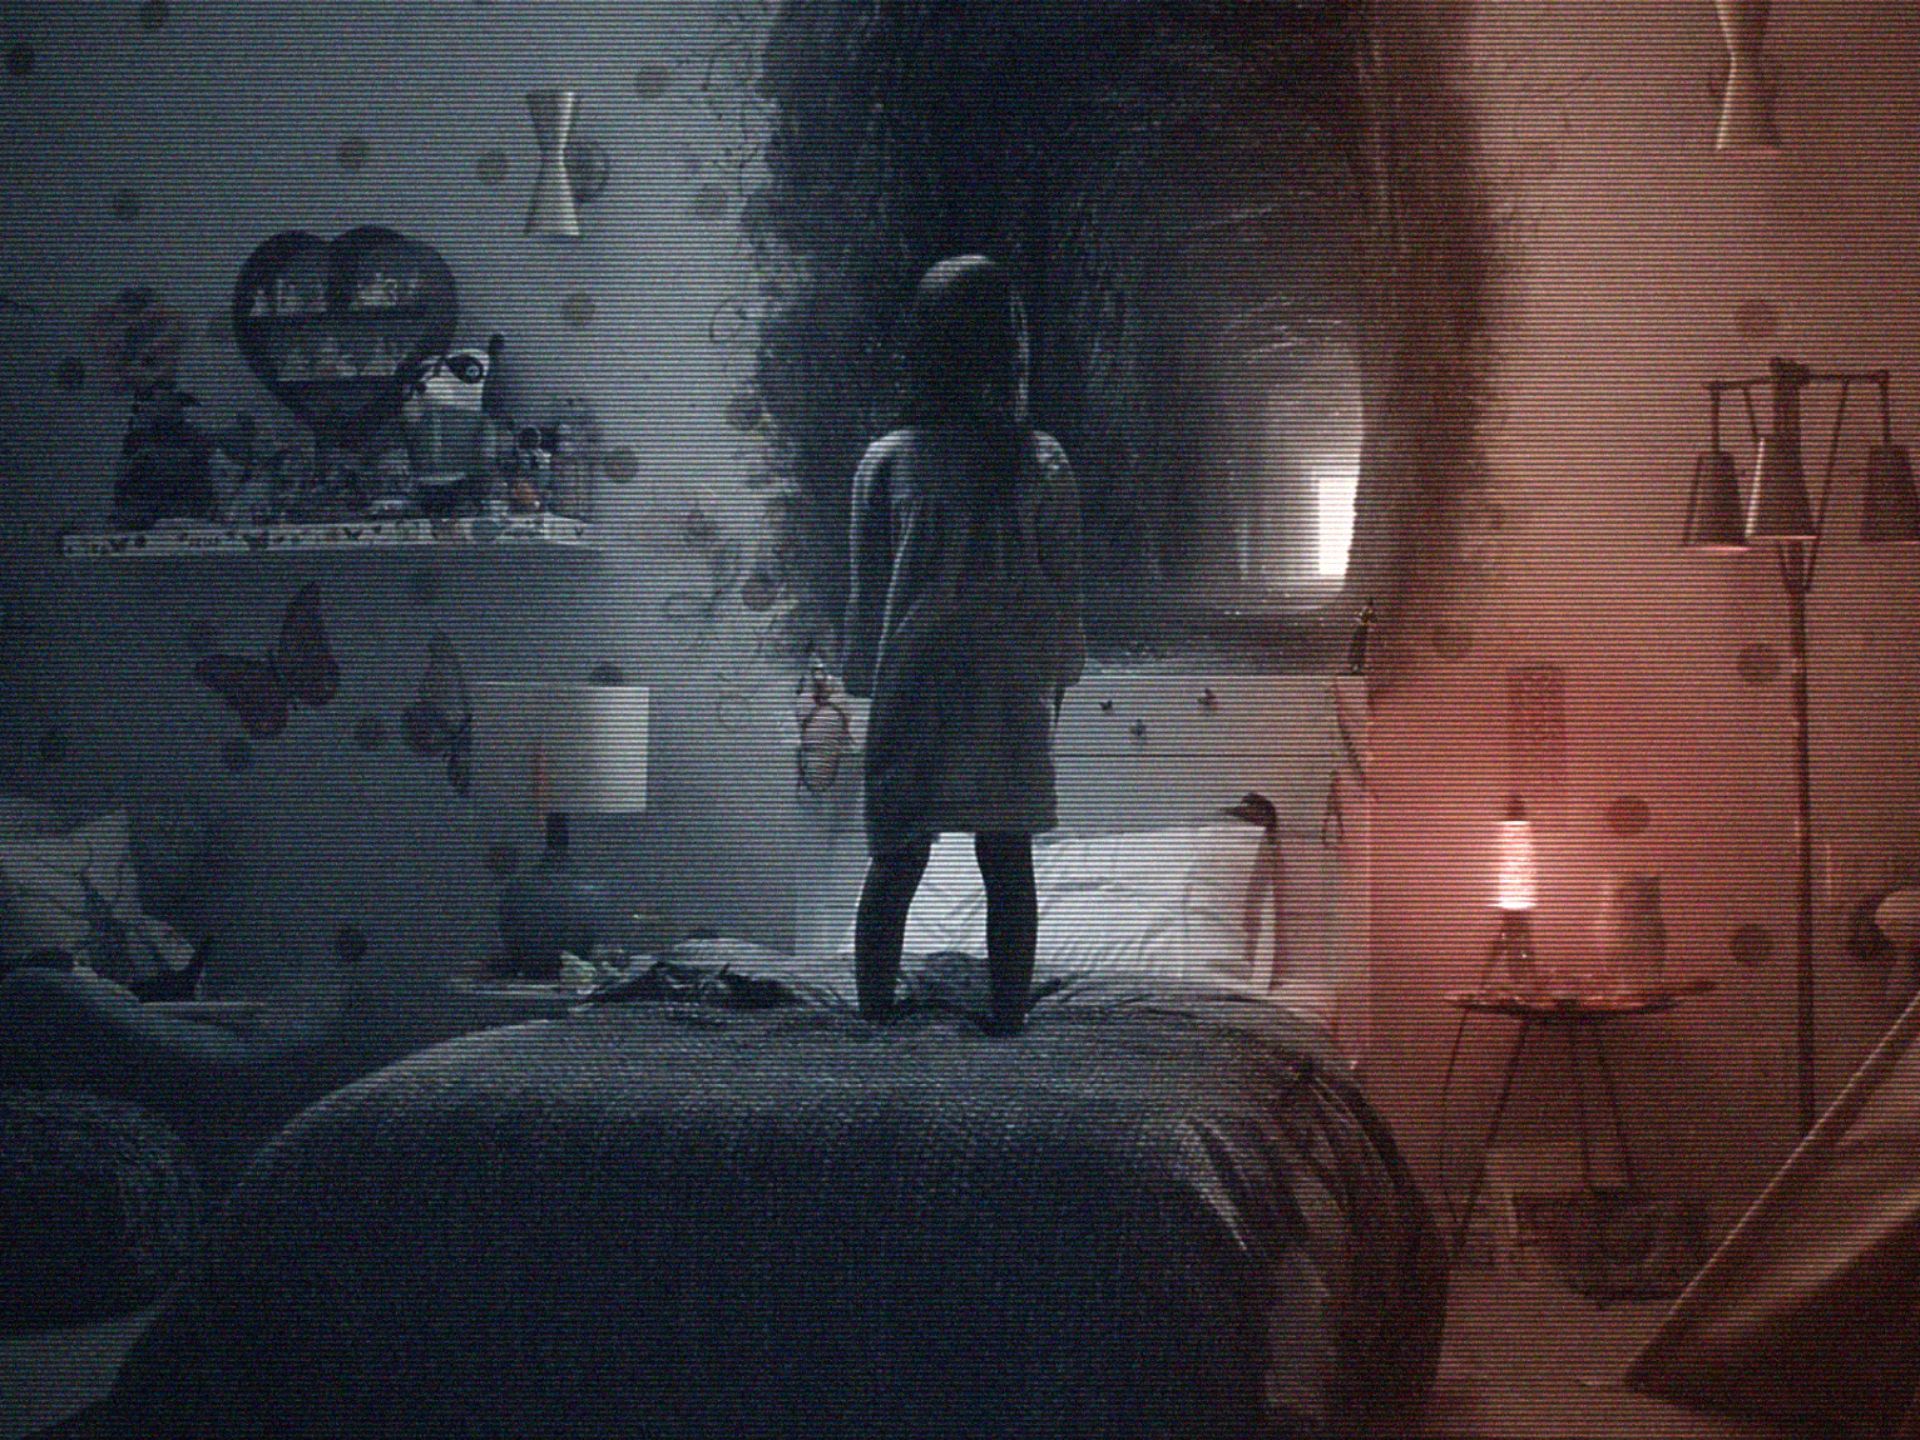 Paranormal Activity: The Ghost Dimension, image via Paramount